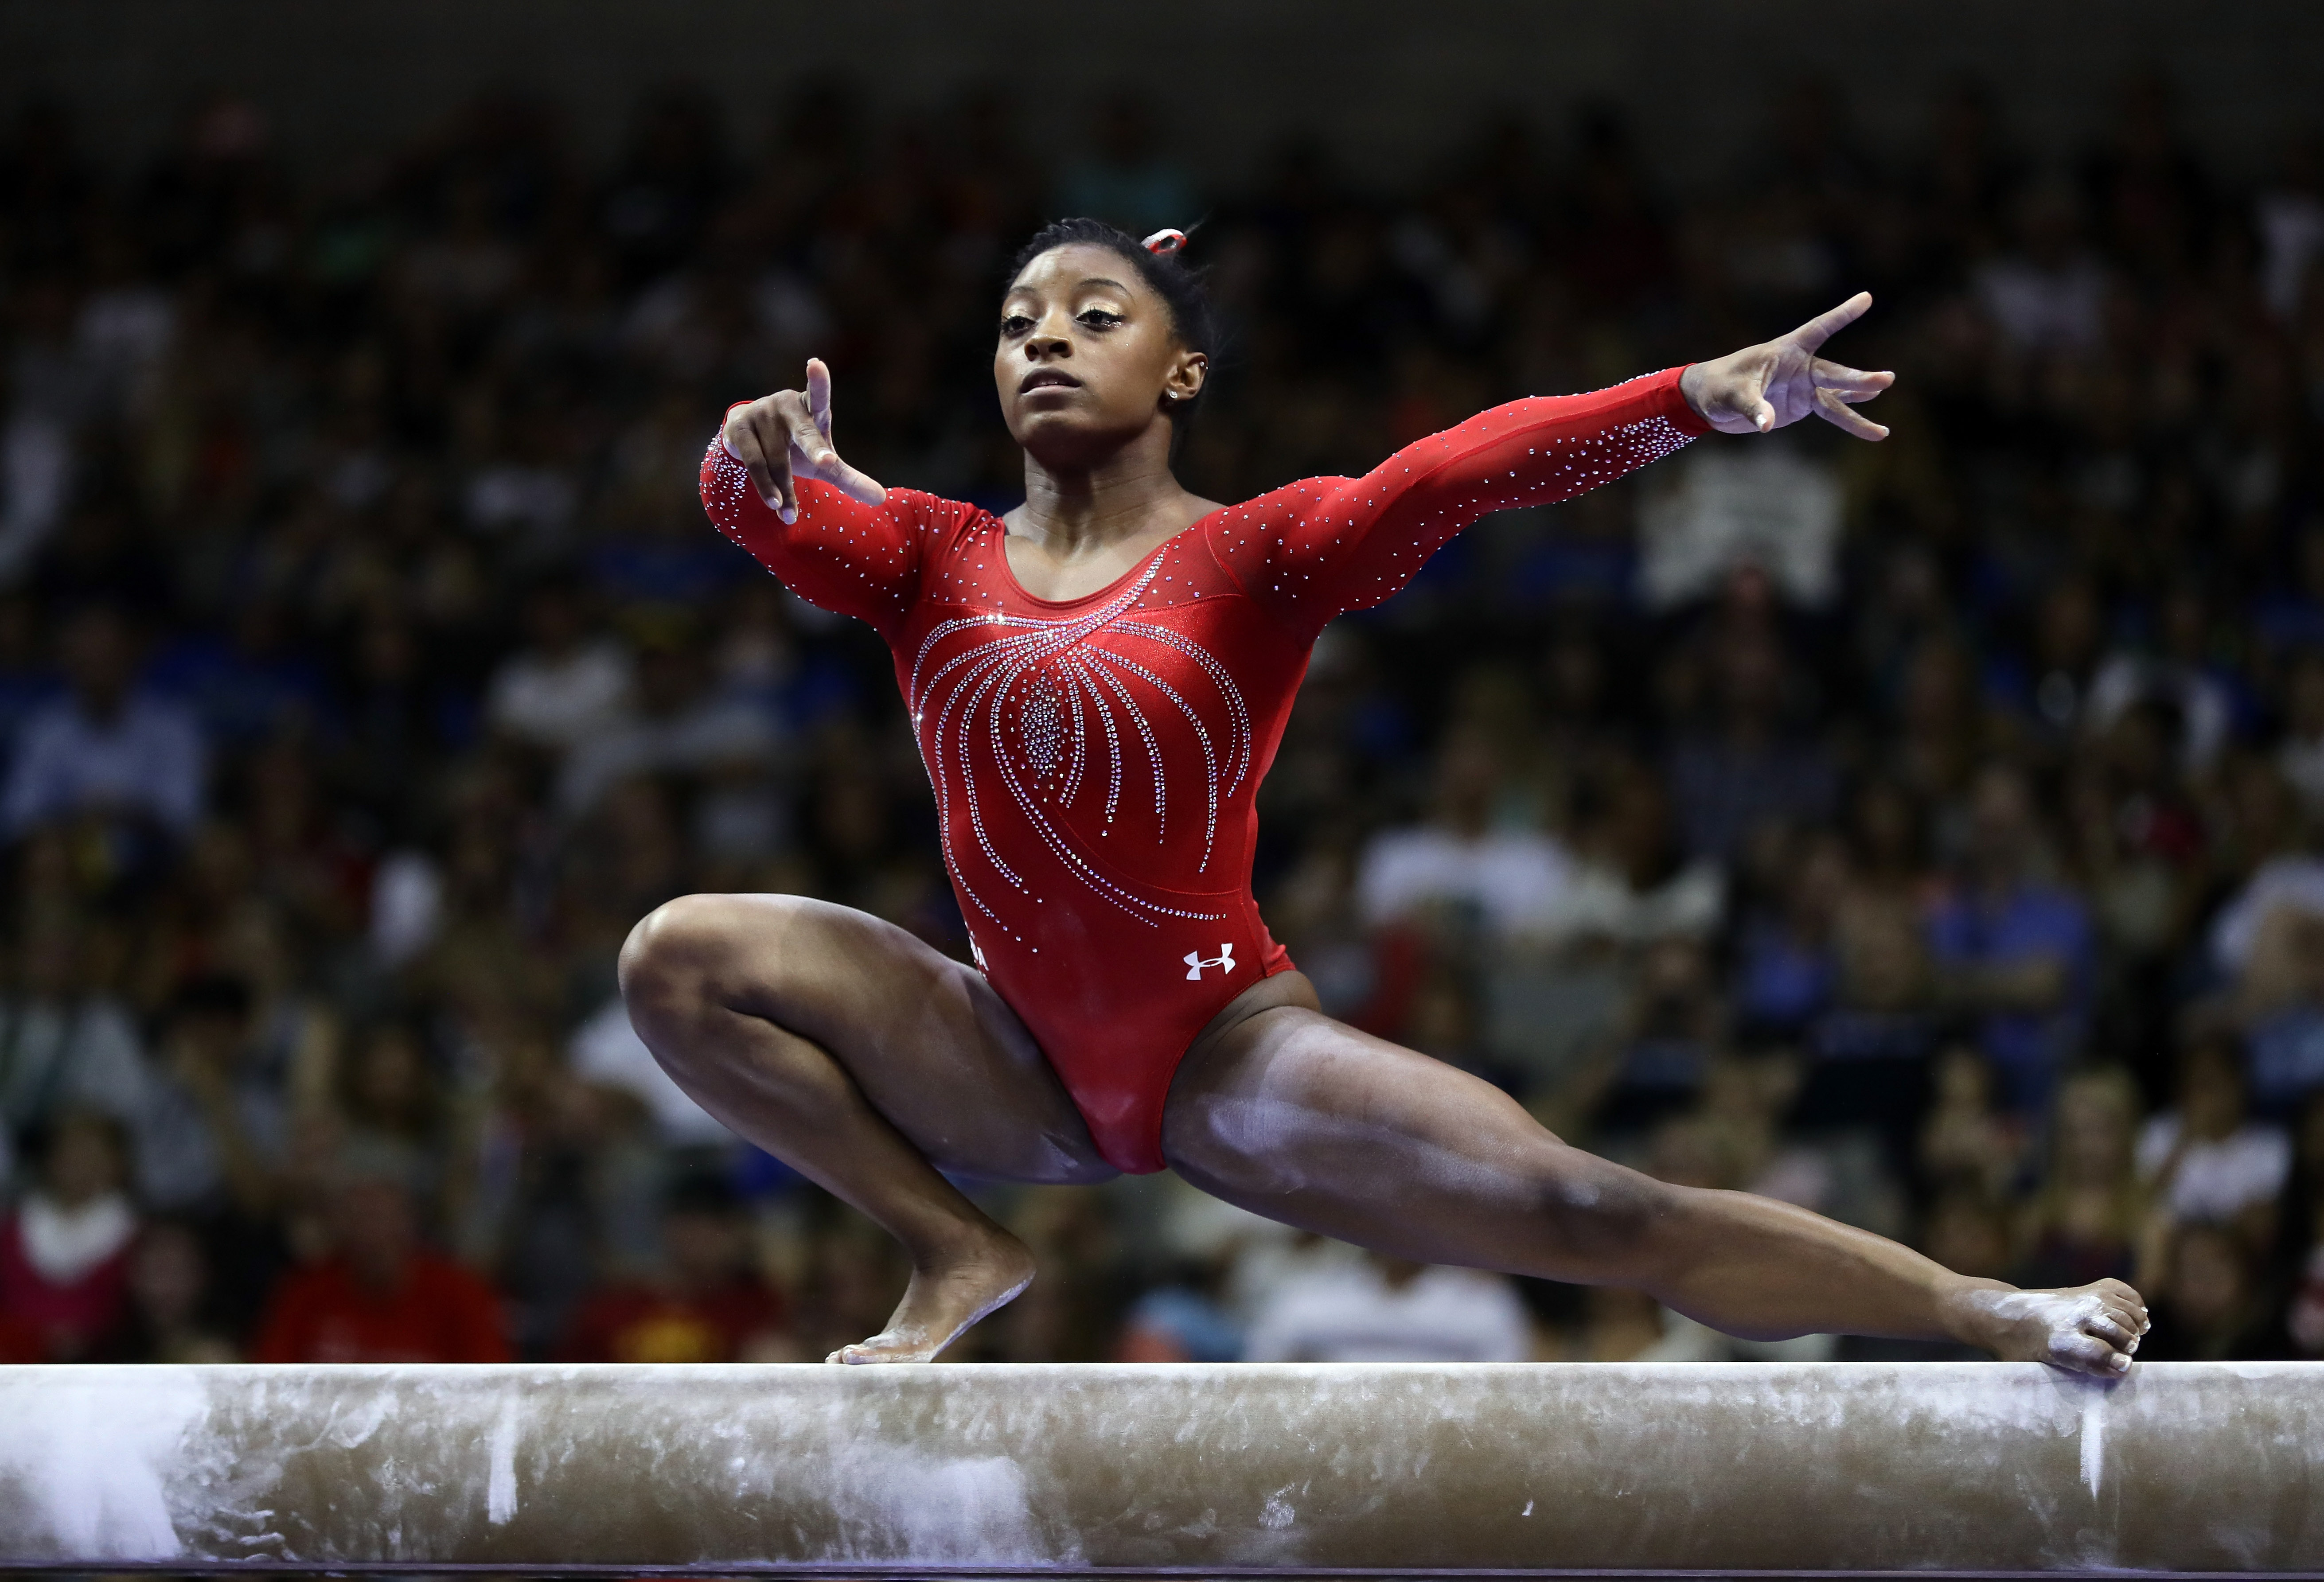 10 Fascinating Facts About Gymnastics From 'The End Of The Perfect 10'